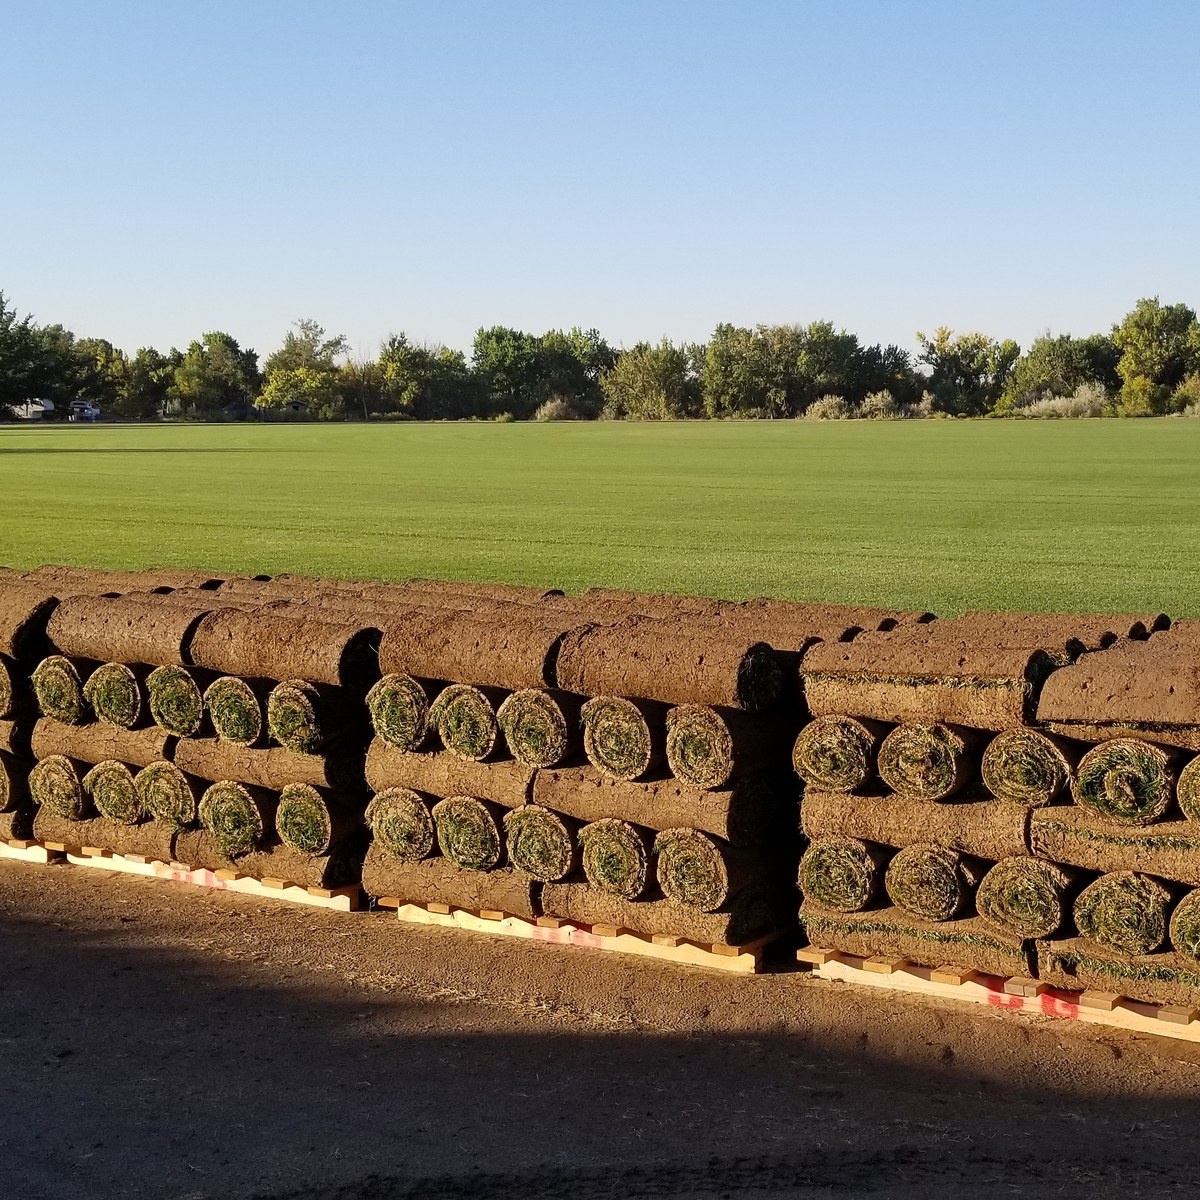 Harvested sod, ready for delivery